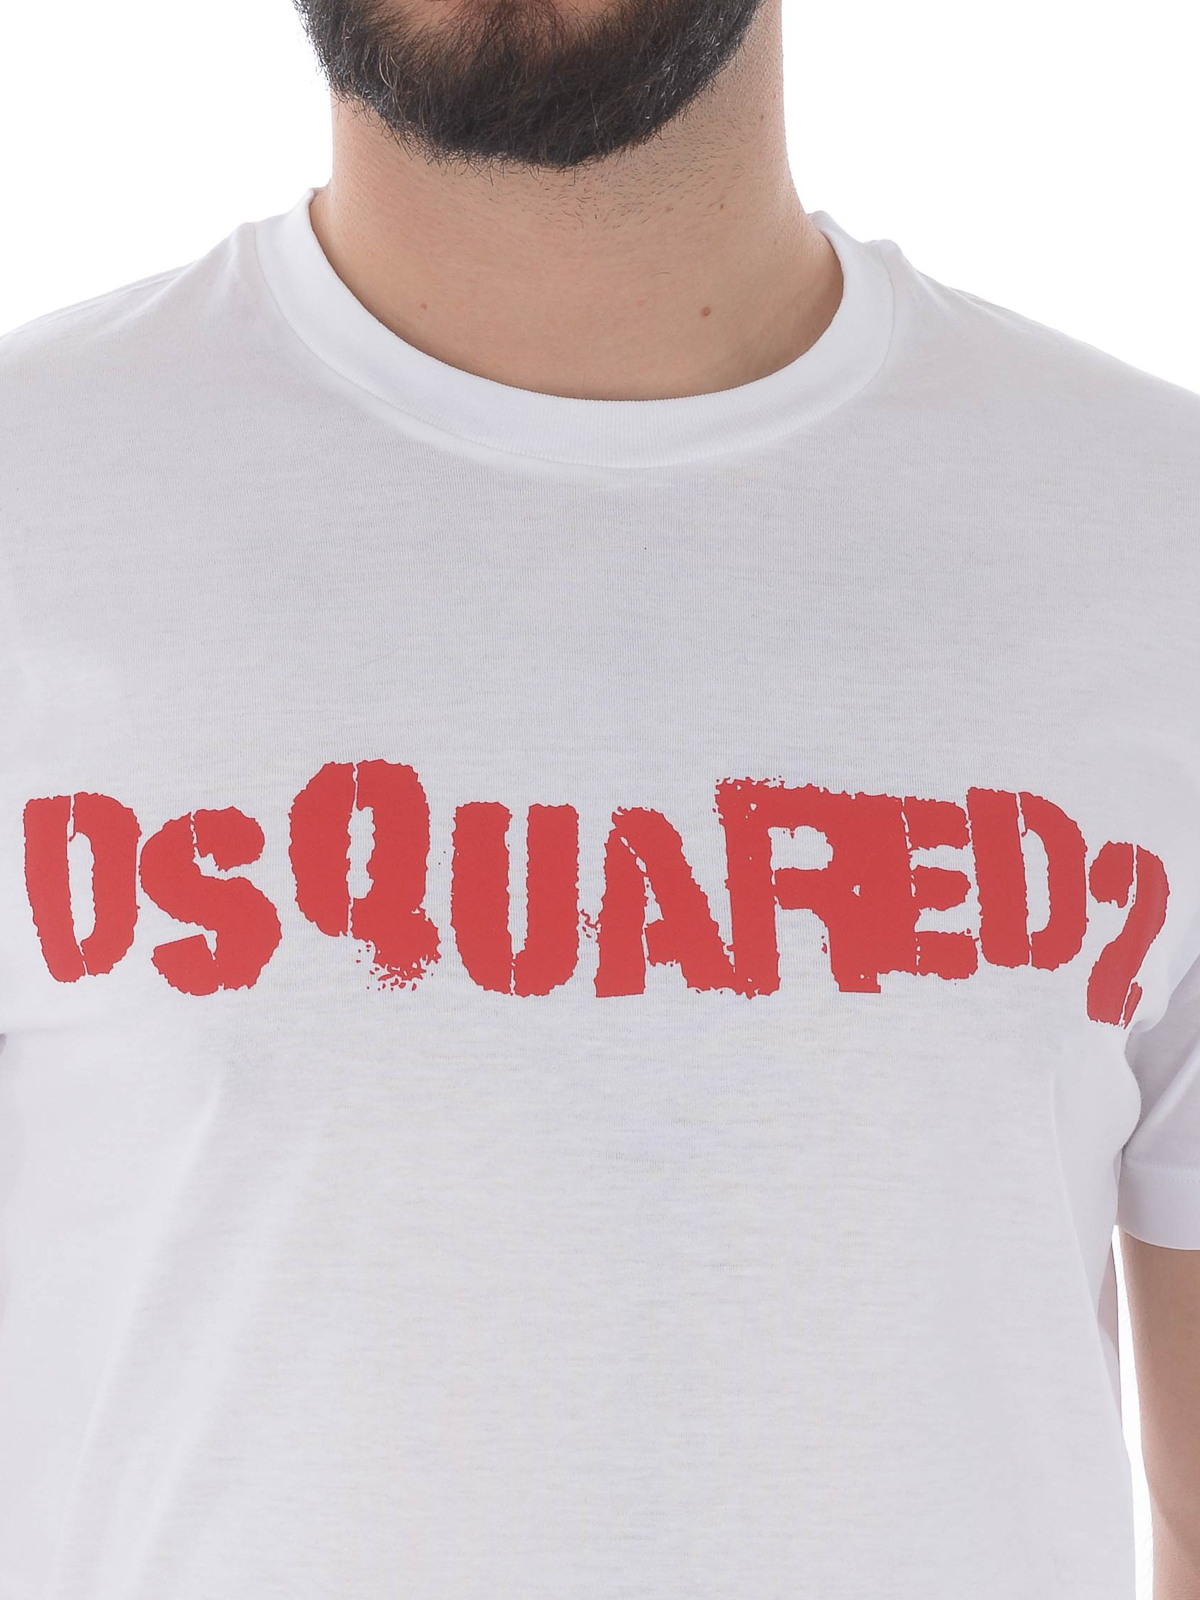 dsquared t shirt red white